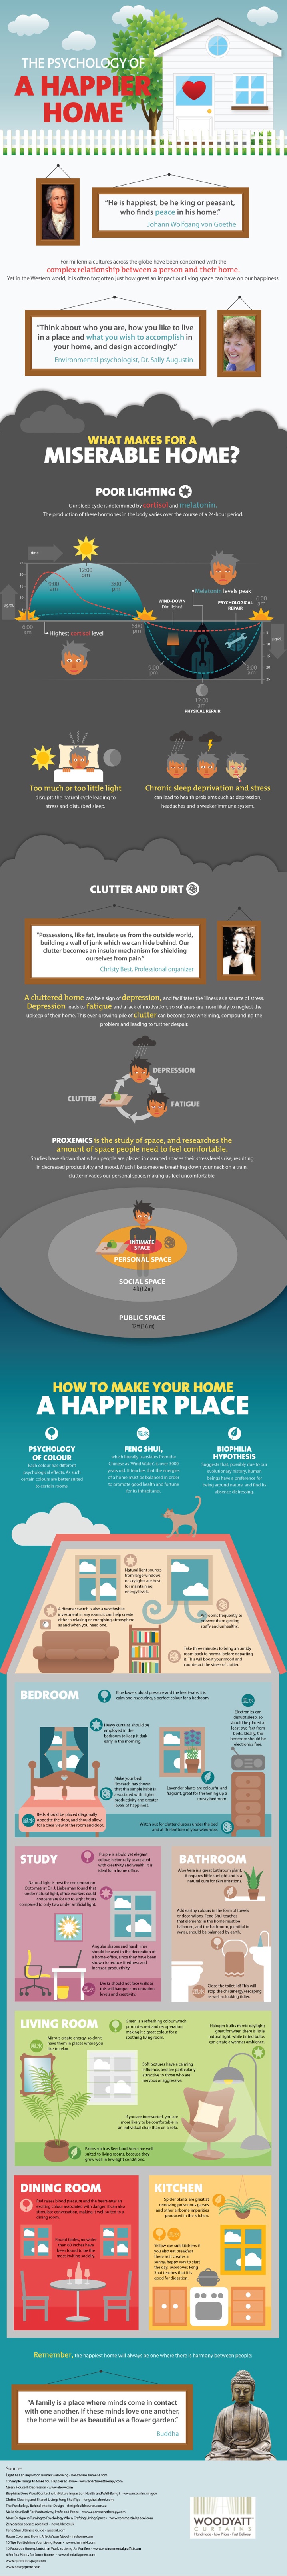 Psychology of a Happier Home